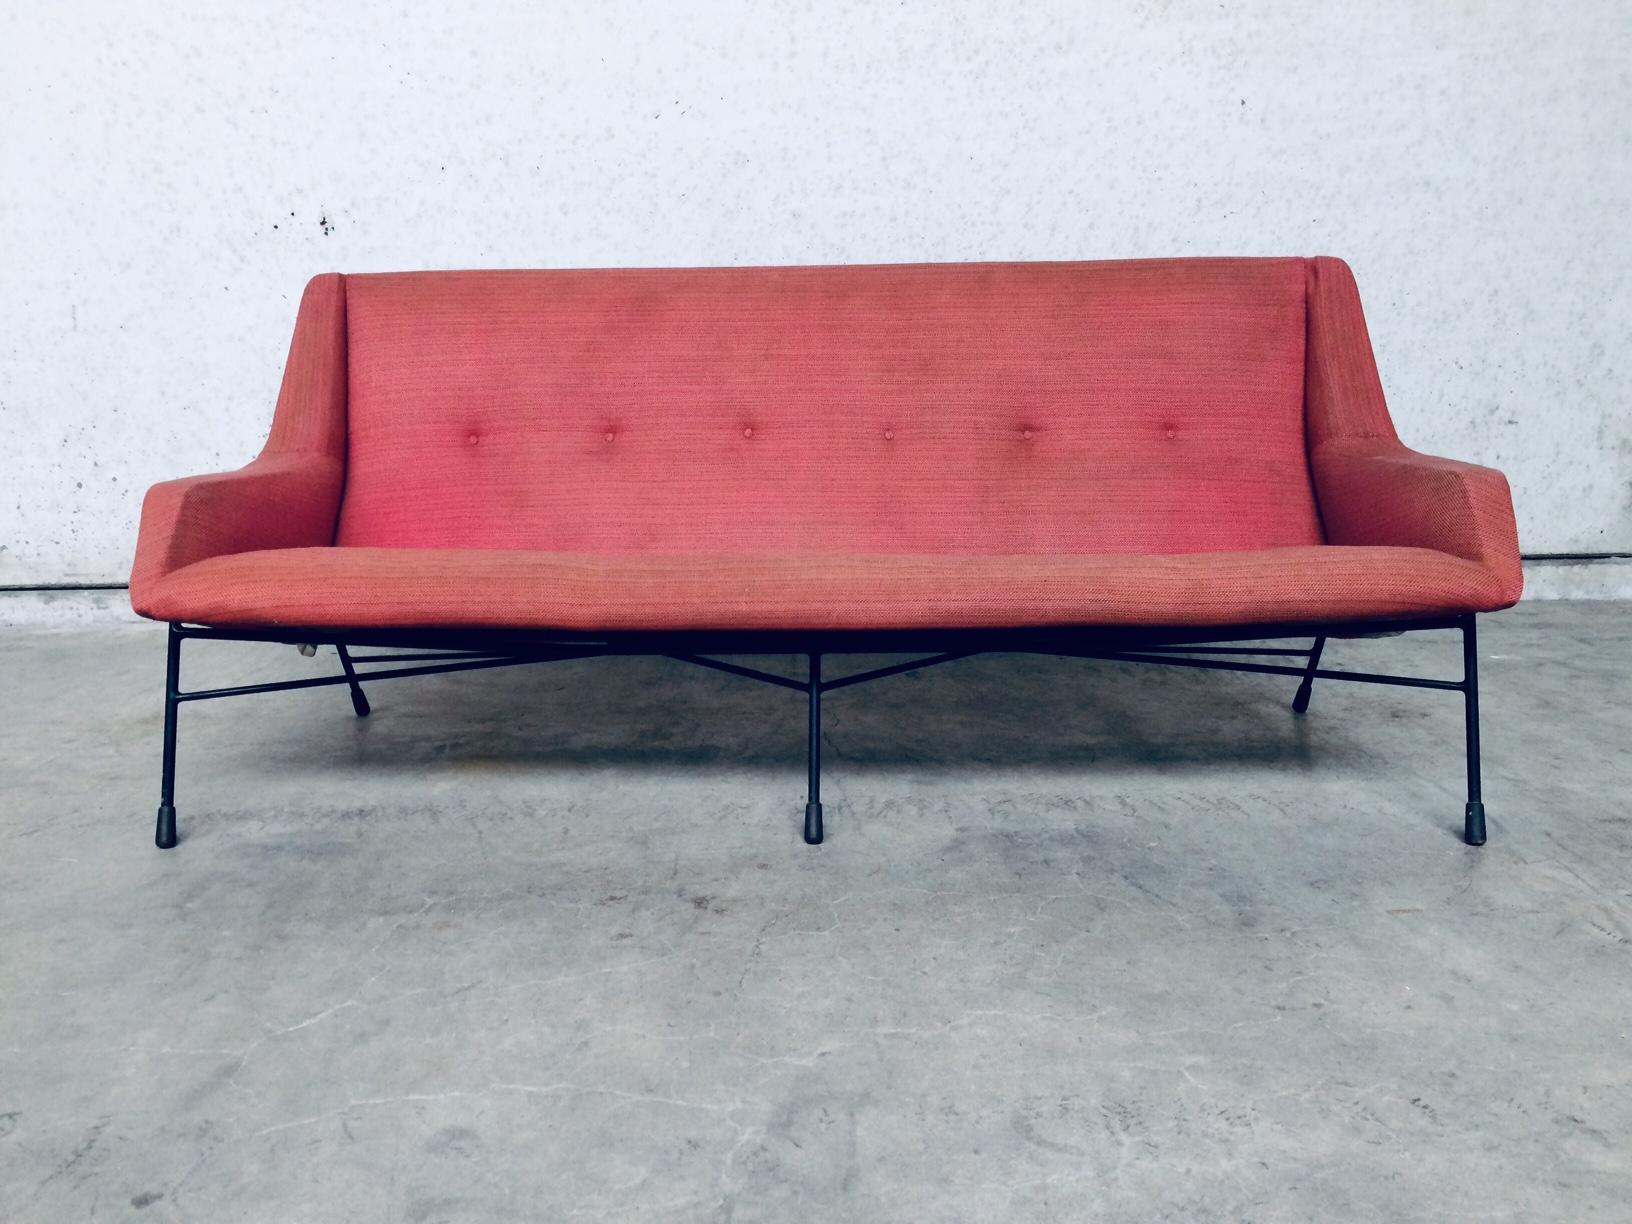 Mid-20th Century S12 Model 3 Seat Sofa by Alfred Hendrickx for Belform, Belgium, 1958 For Sale